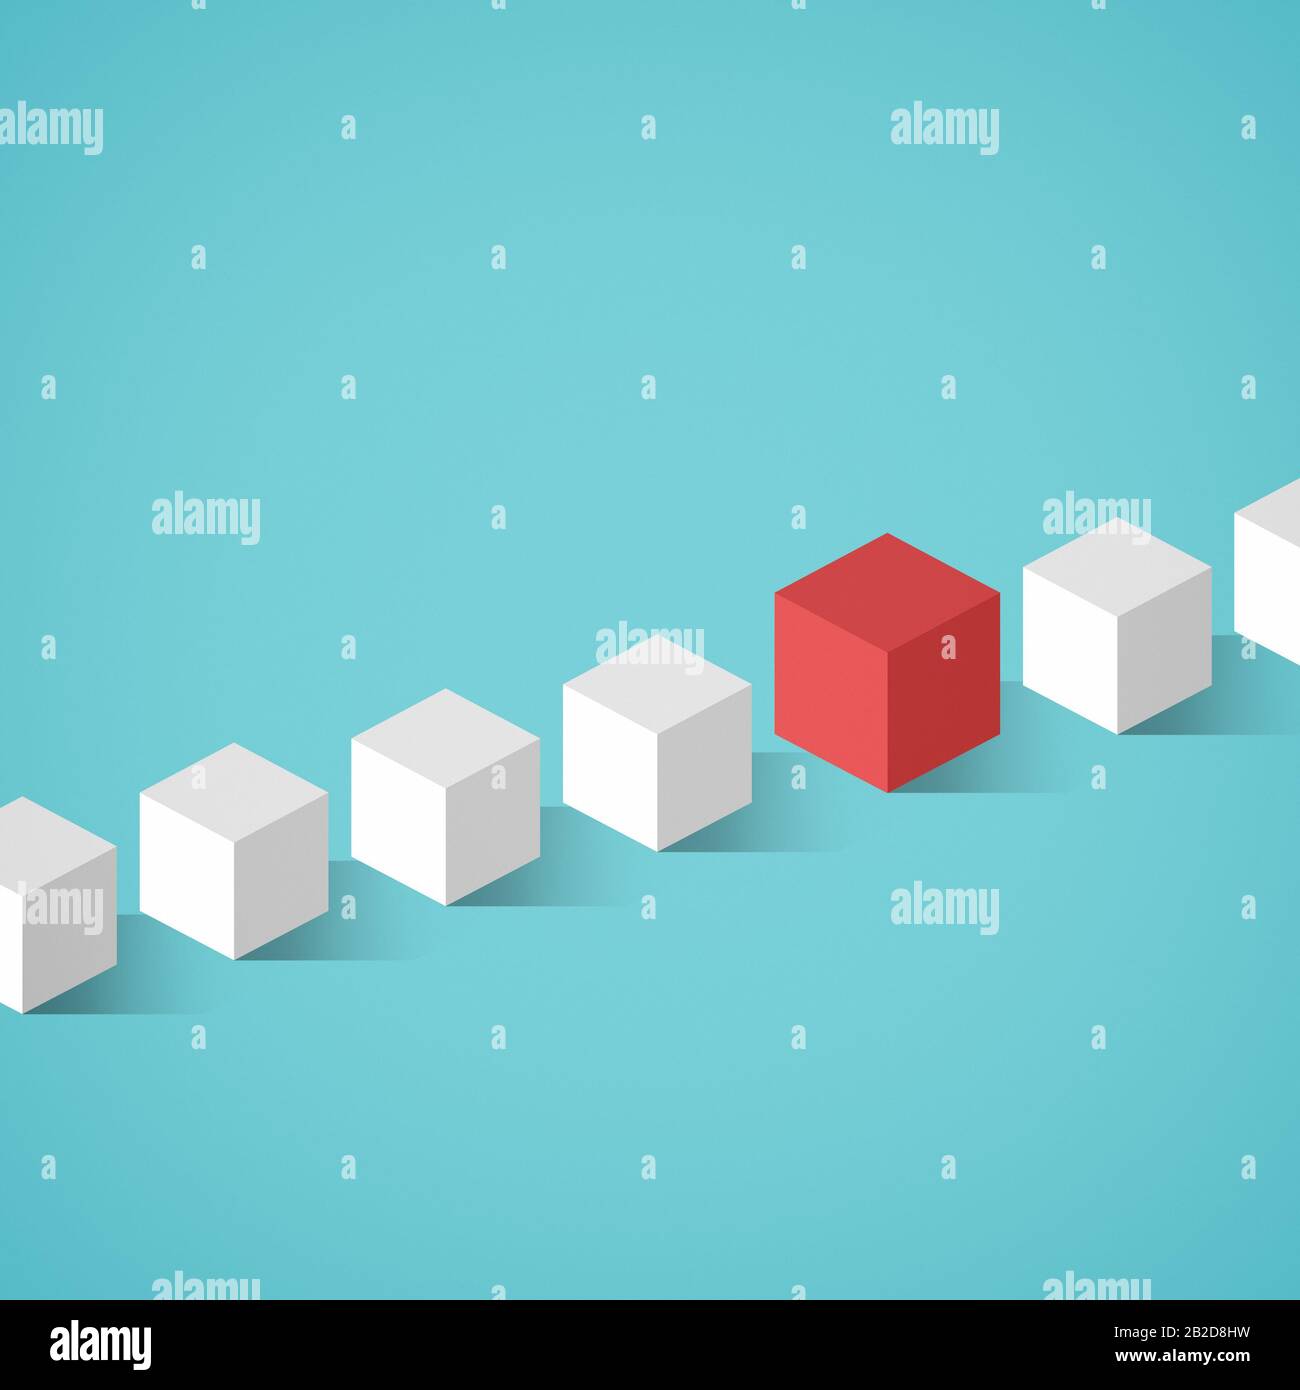 White isometric cubes in a row and one bigger red unique cube in the middle. Concept image of uniqueness,individuality and standing out from the crowd Stock Photo